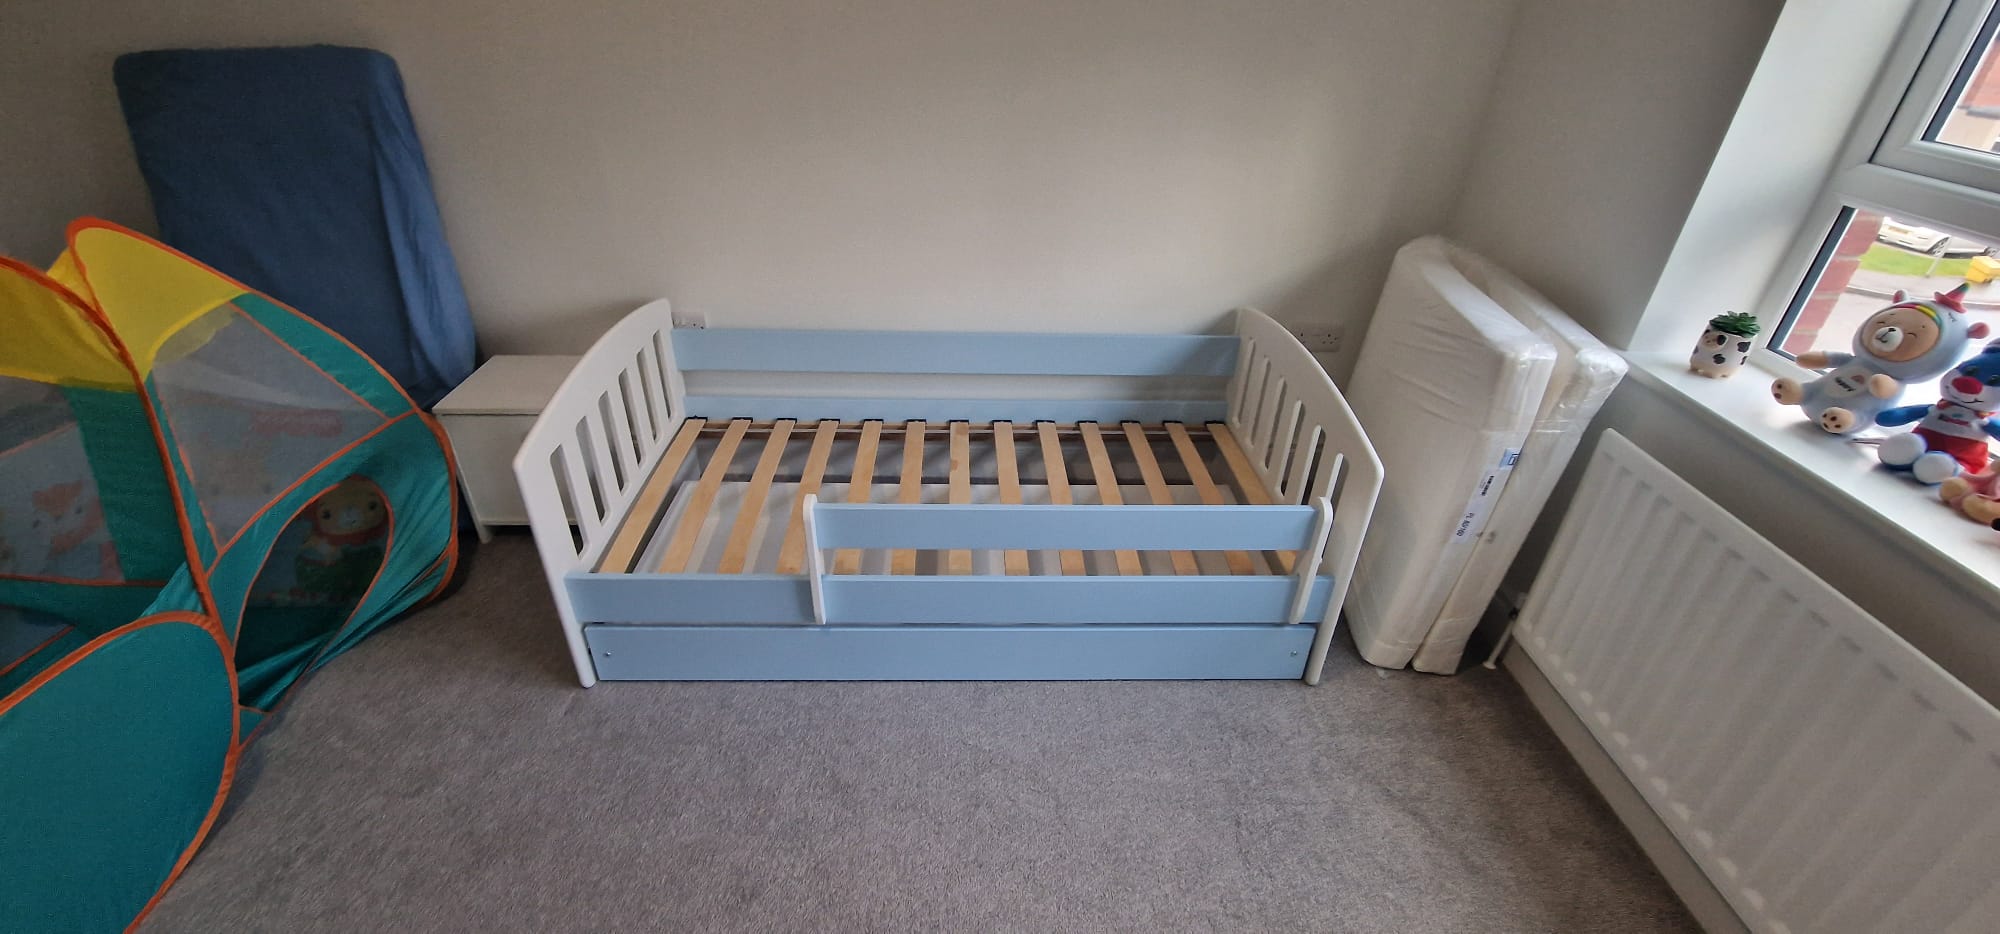 Toddler bed assembly